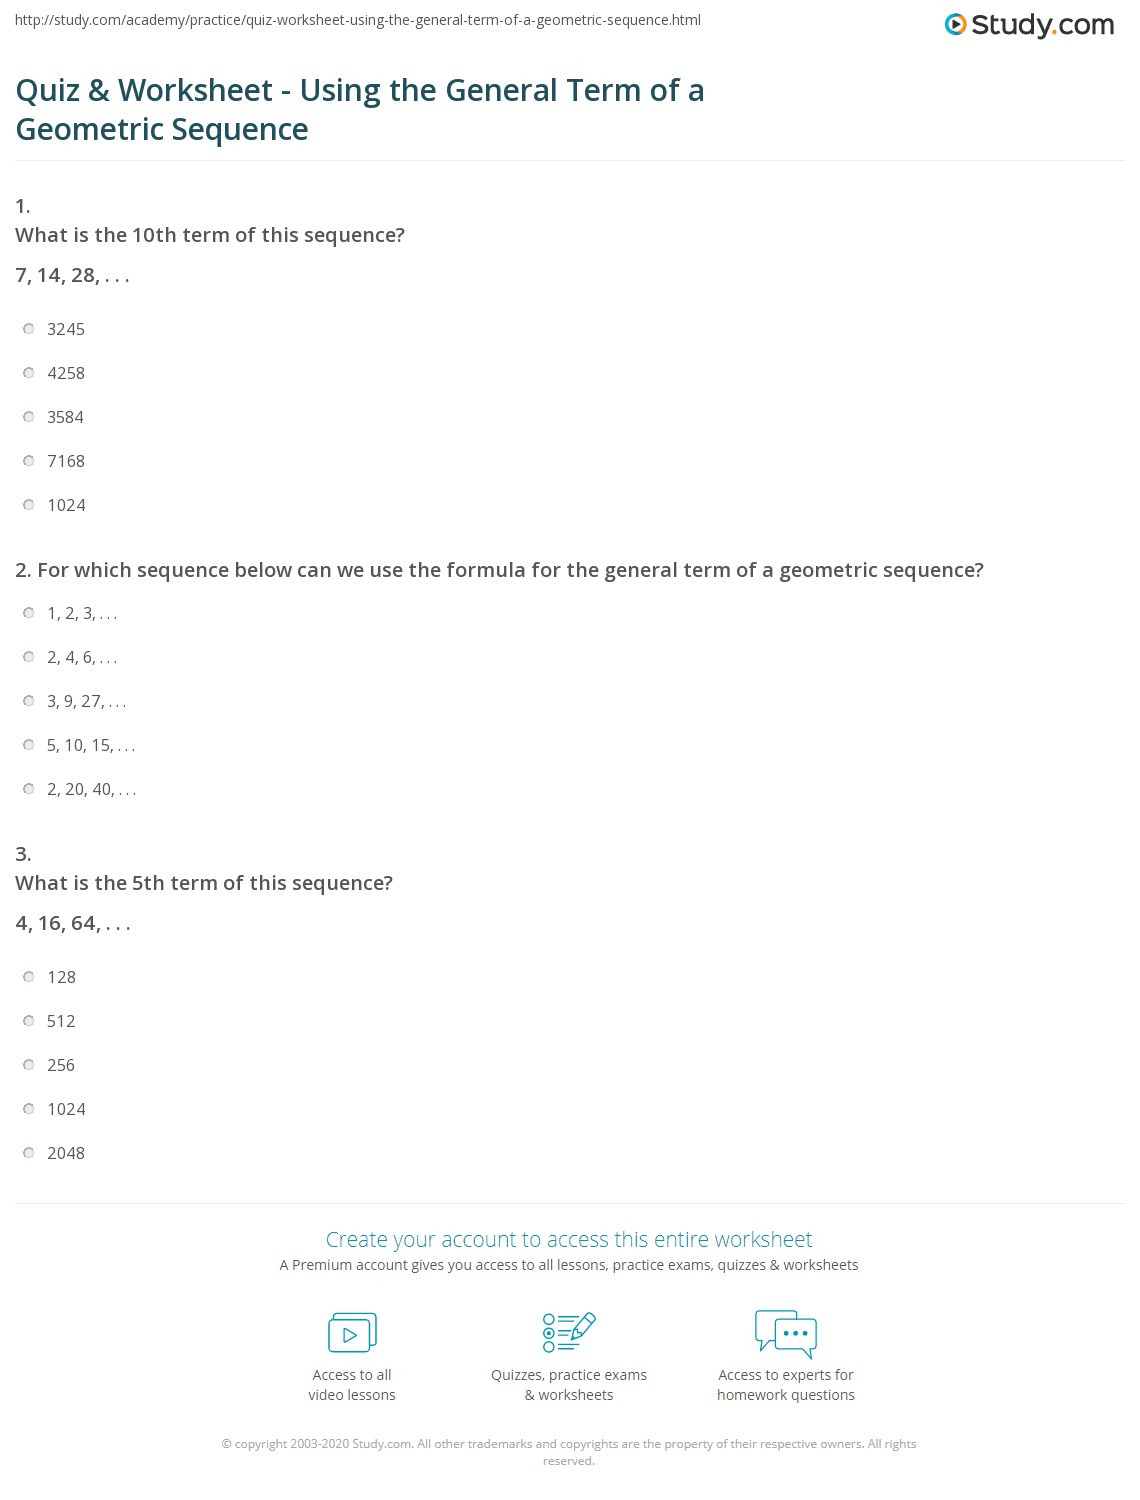 Geometric Sequences Worksheet Answers Quiz &amp; Worksheet Using the General Term Of A Geometric